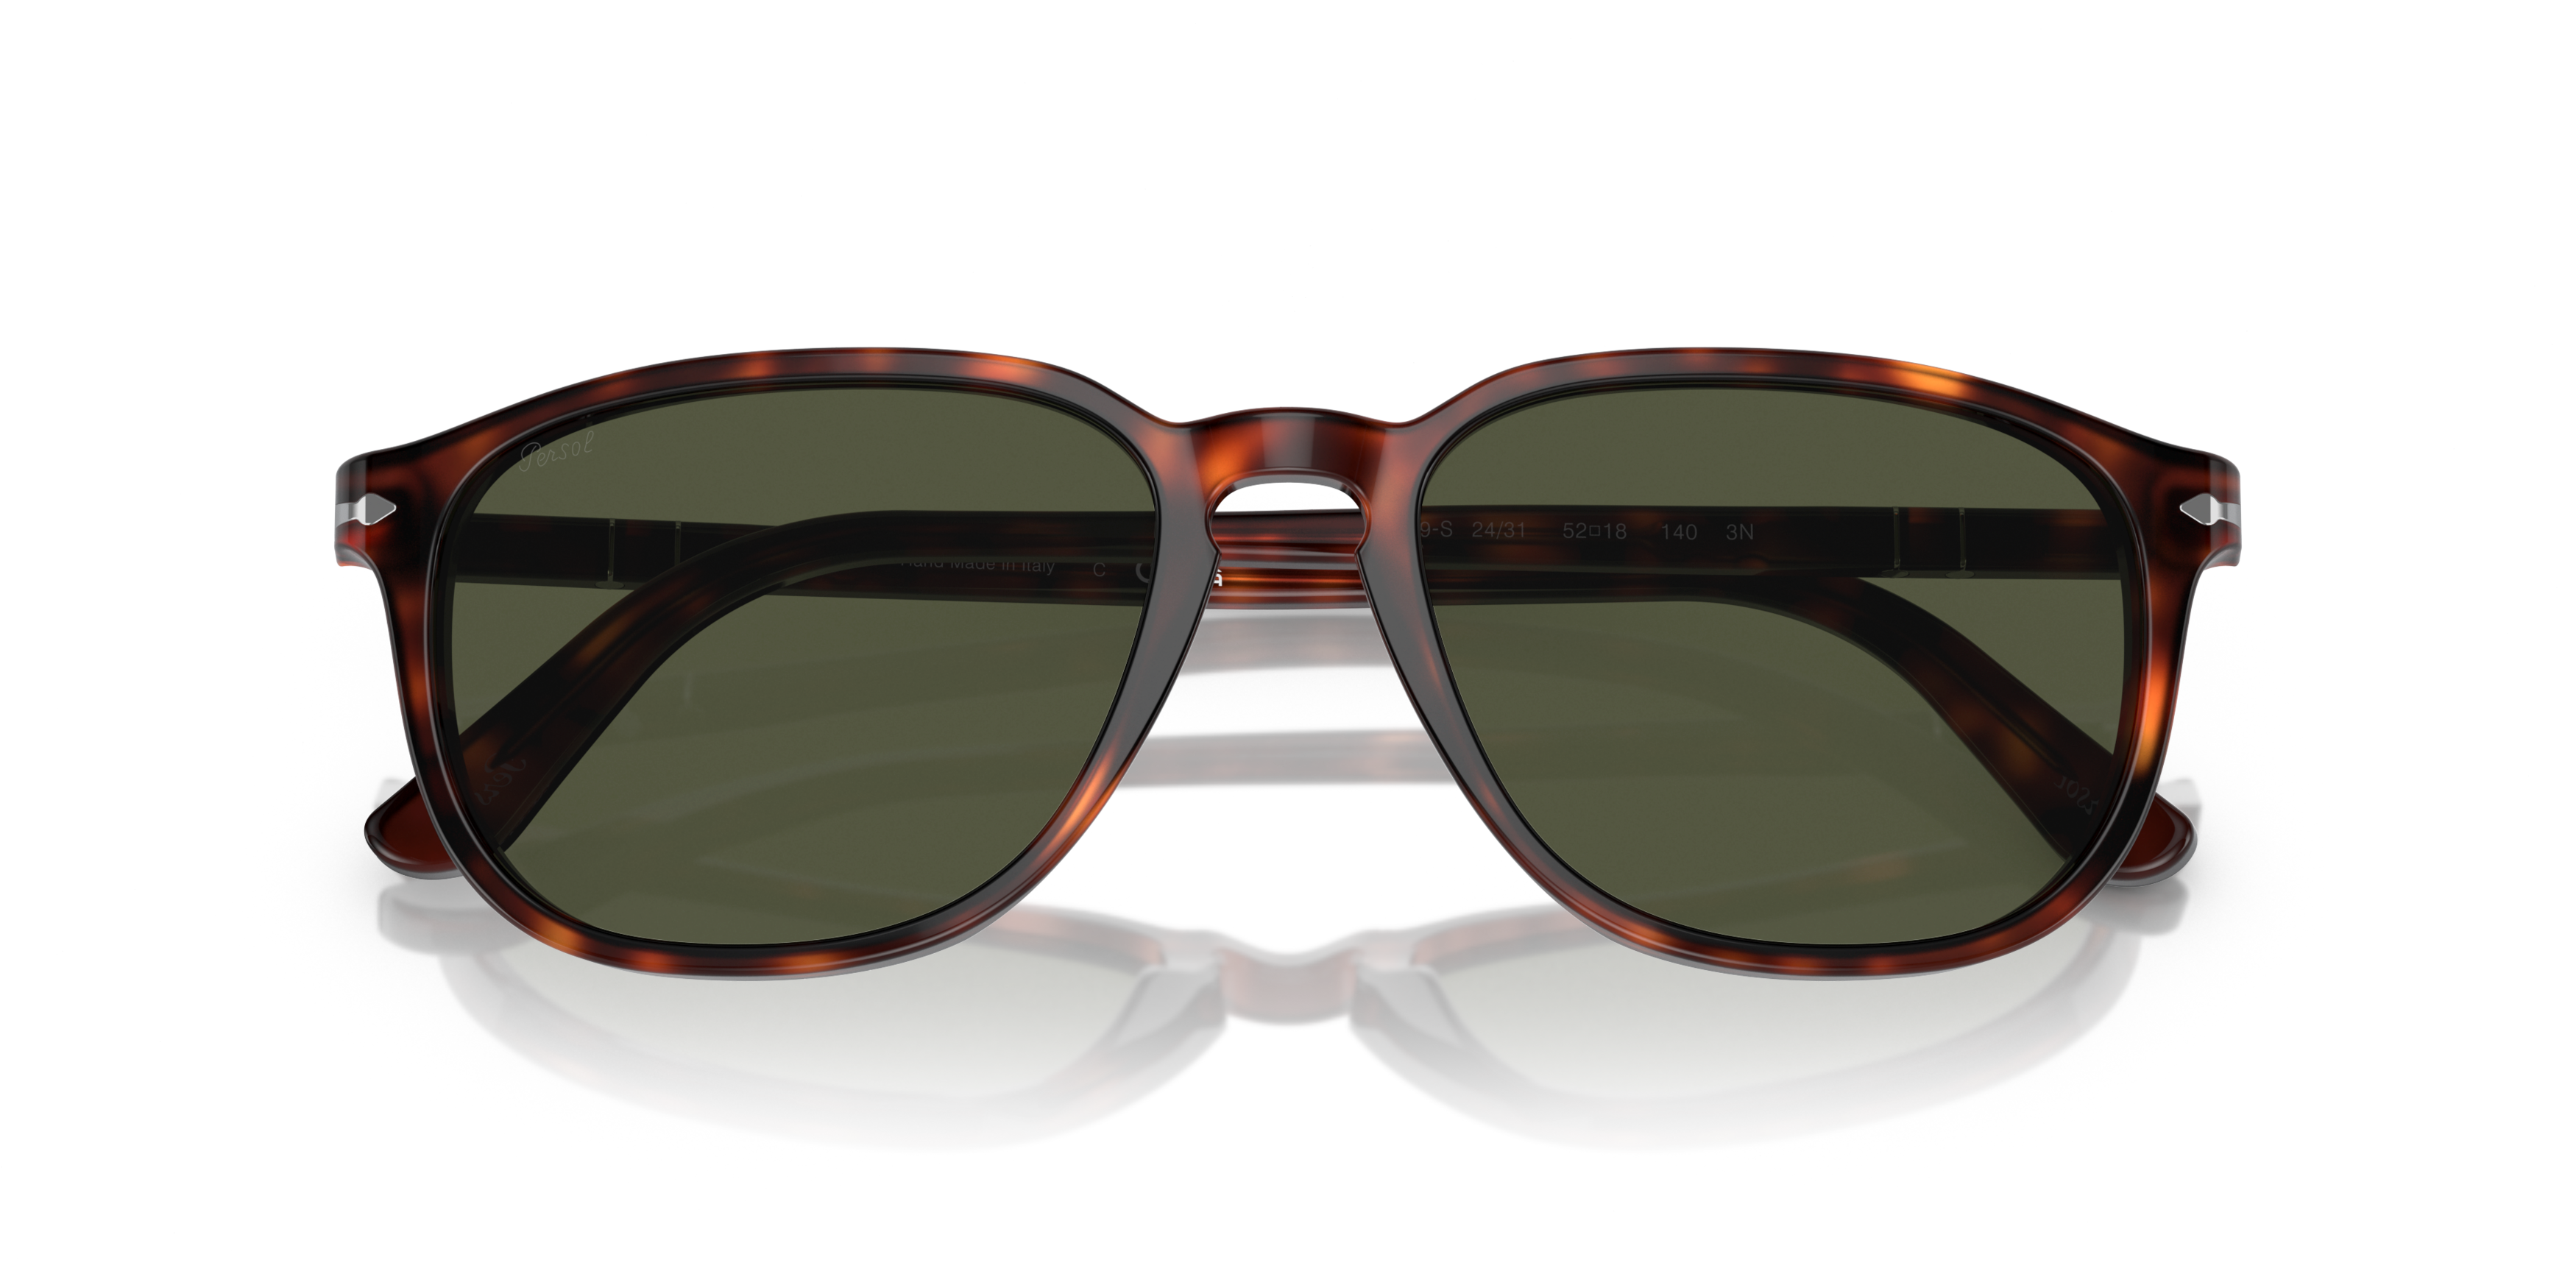 [products.image.folded] Persol PO3019S 24/31